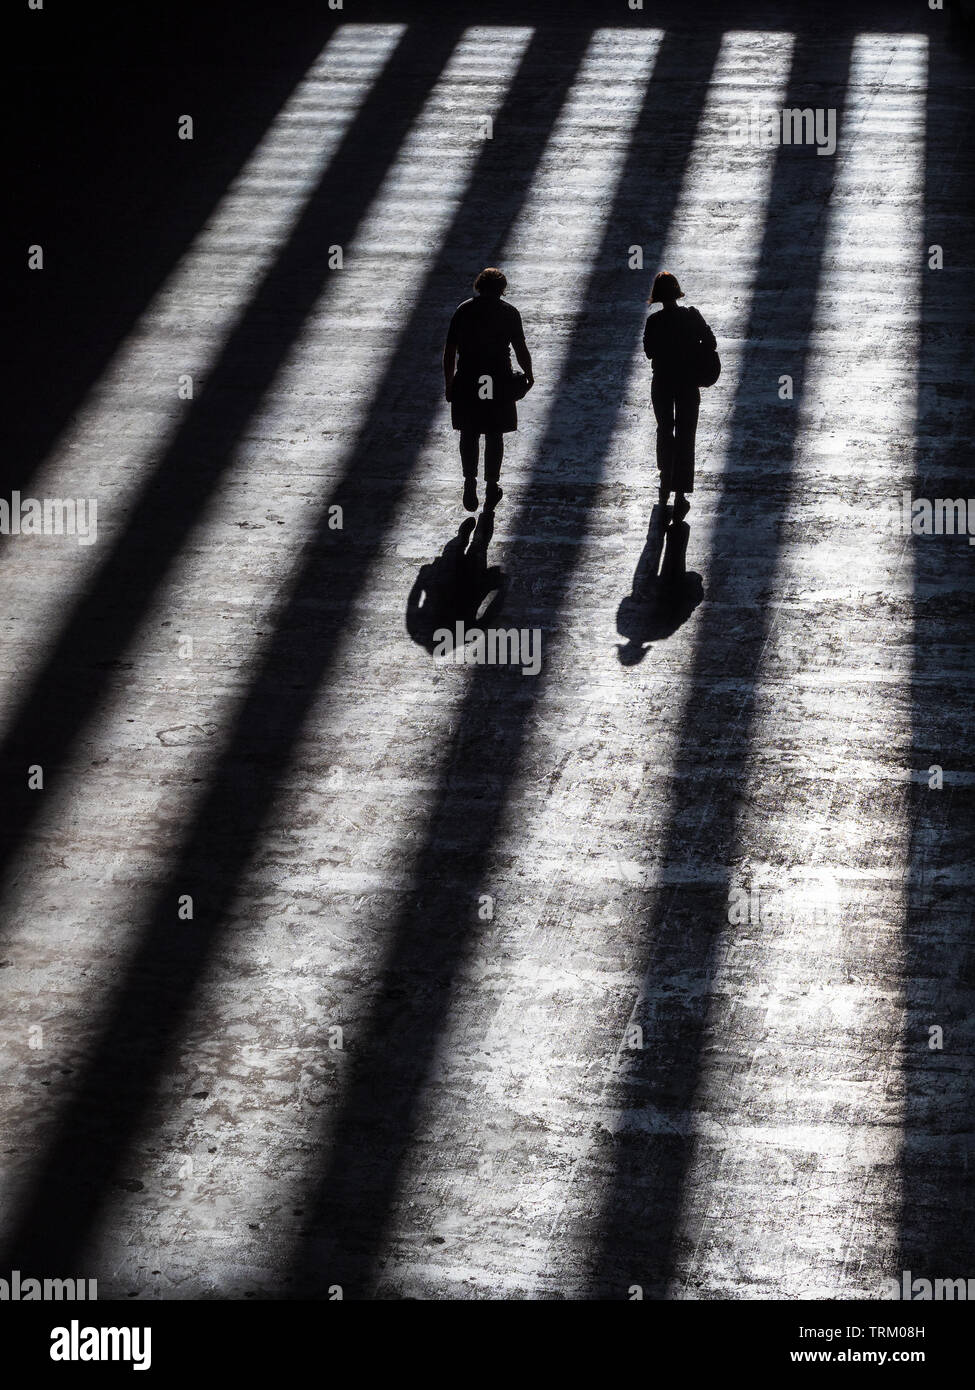 Tate Modern Art Gallery - shadows fall on people walking towards the gallery exit Stock Photo